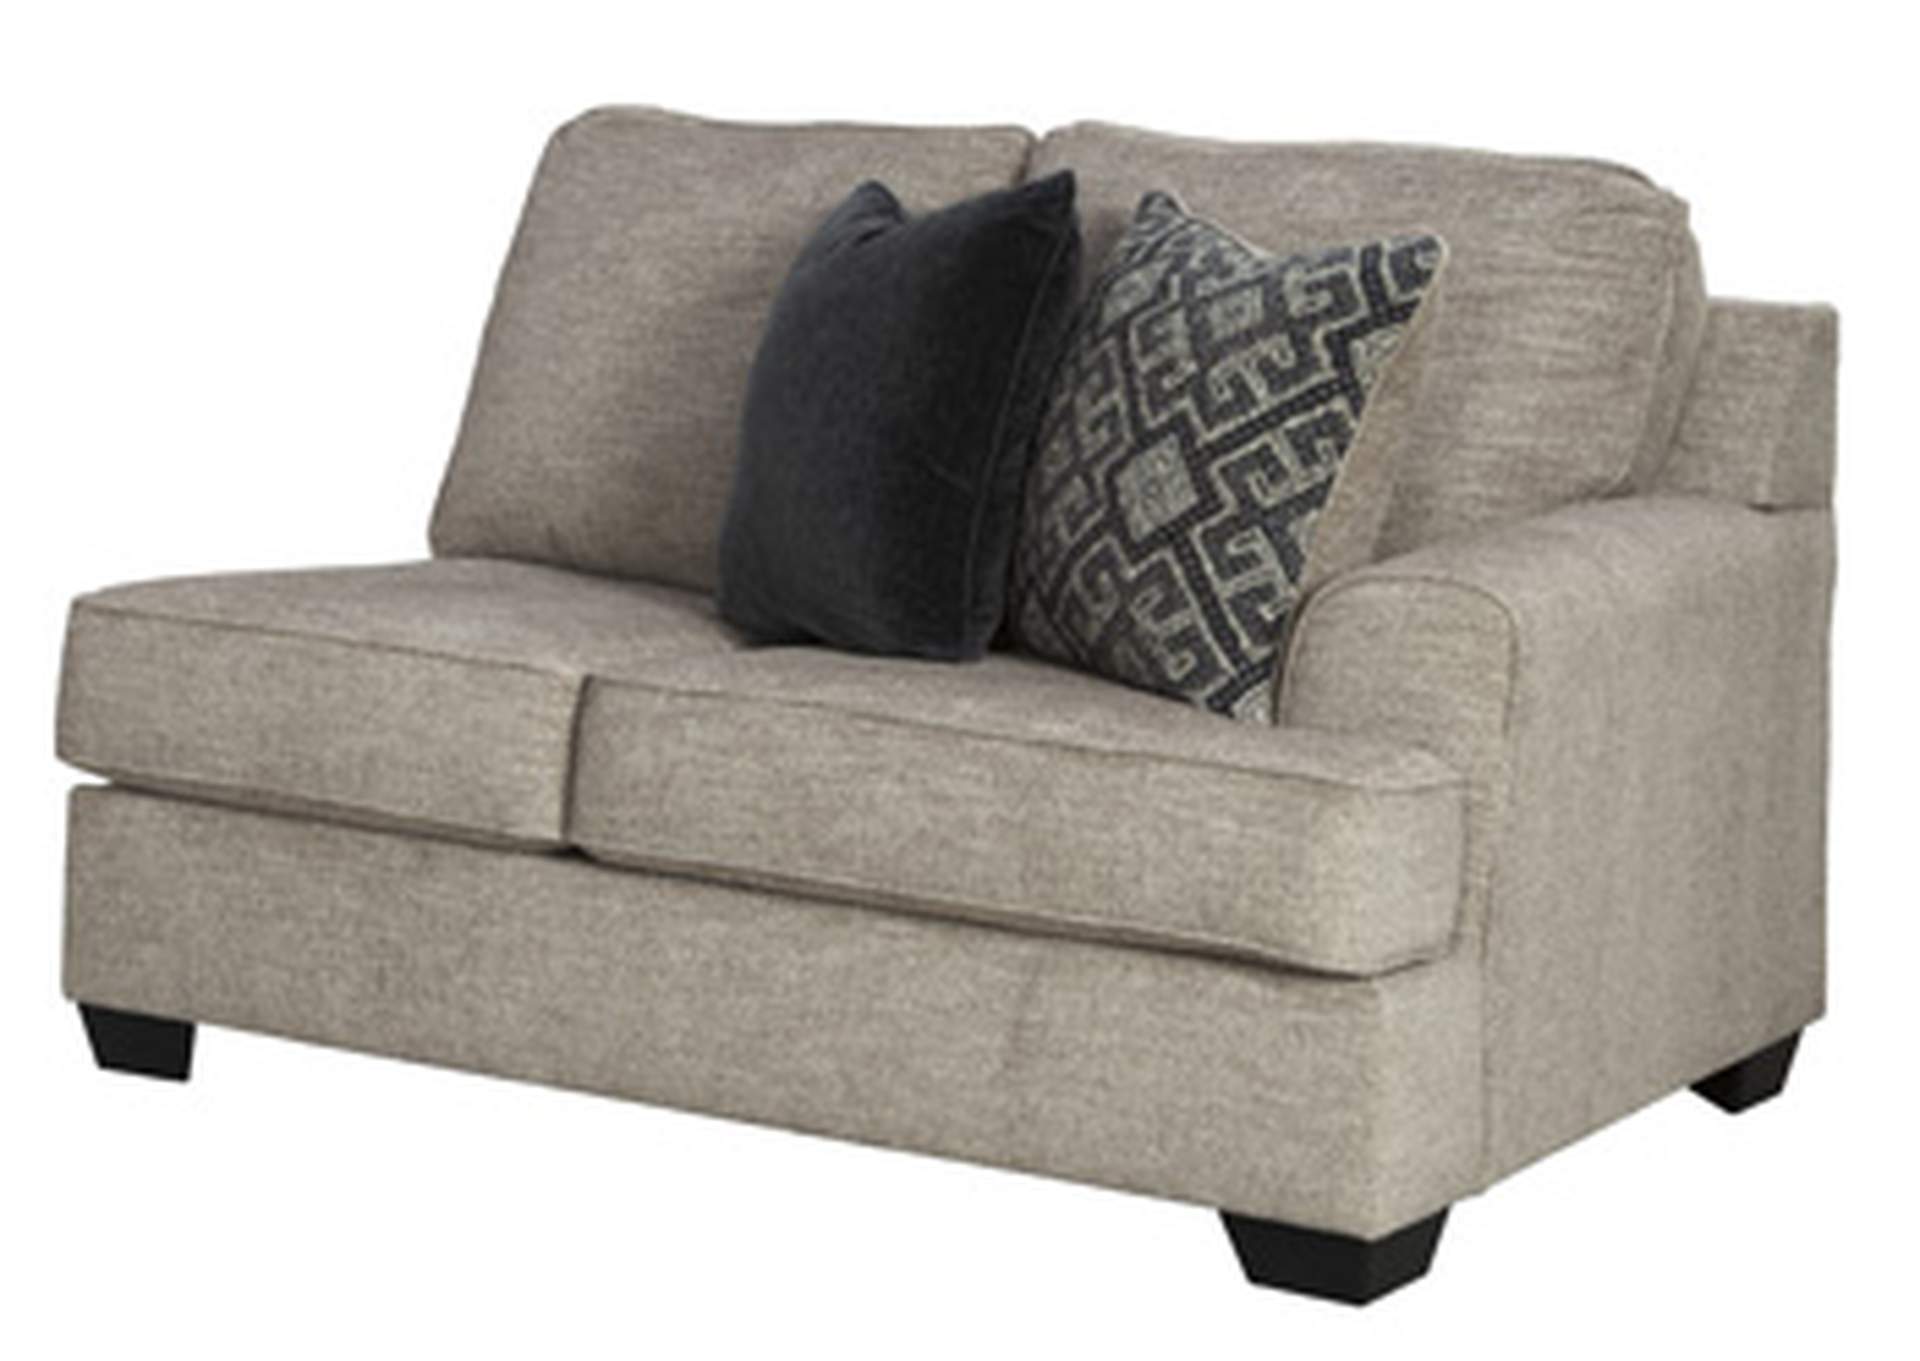 Bovarian Right-Arm Facing Loveseat,Signature Design By Ashley